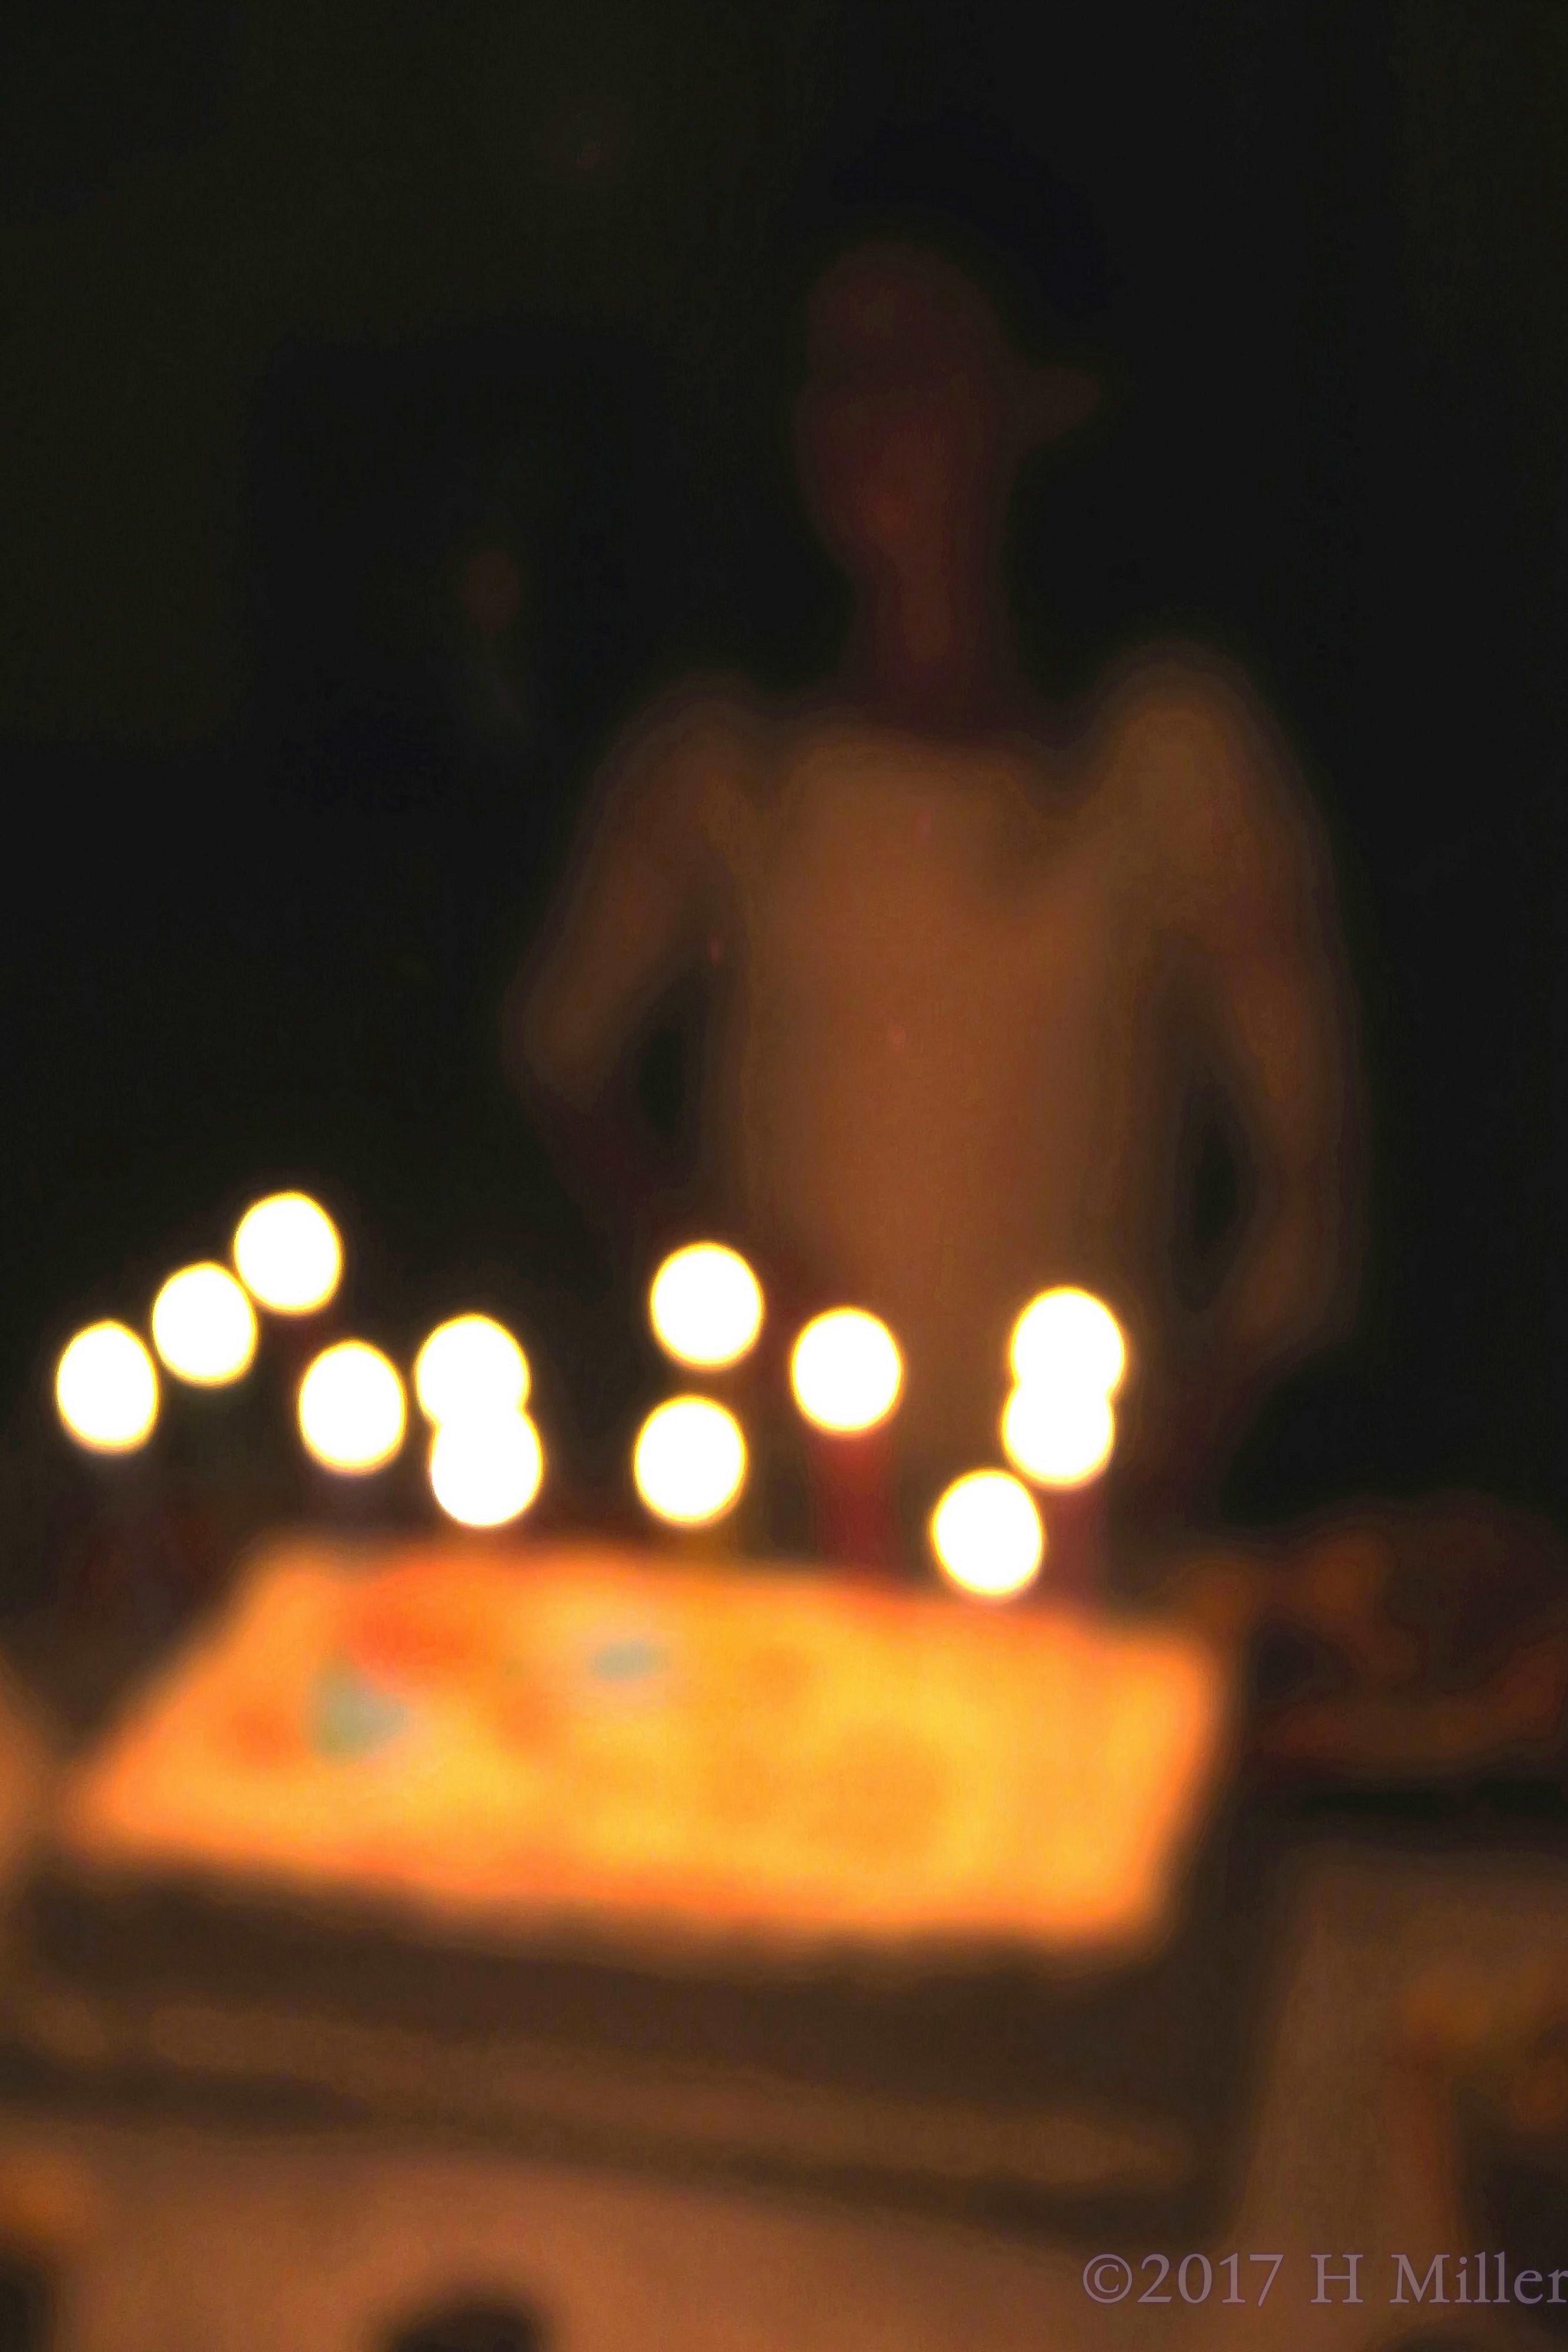 How Pretty The Candles Glow On The Birthday Cake! 